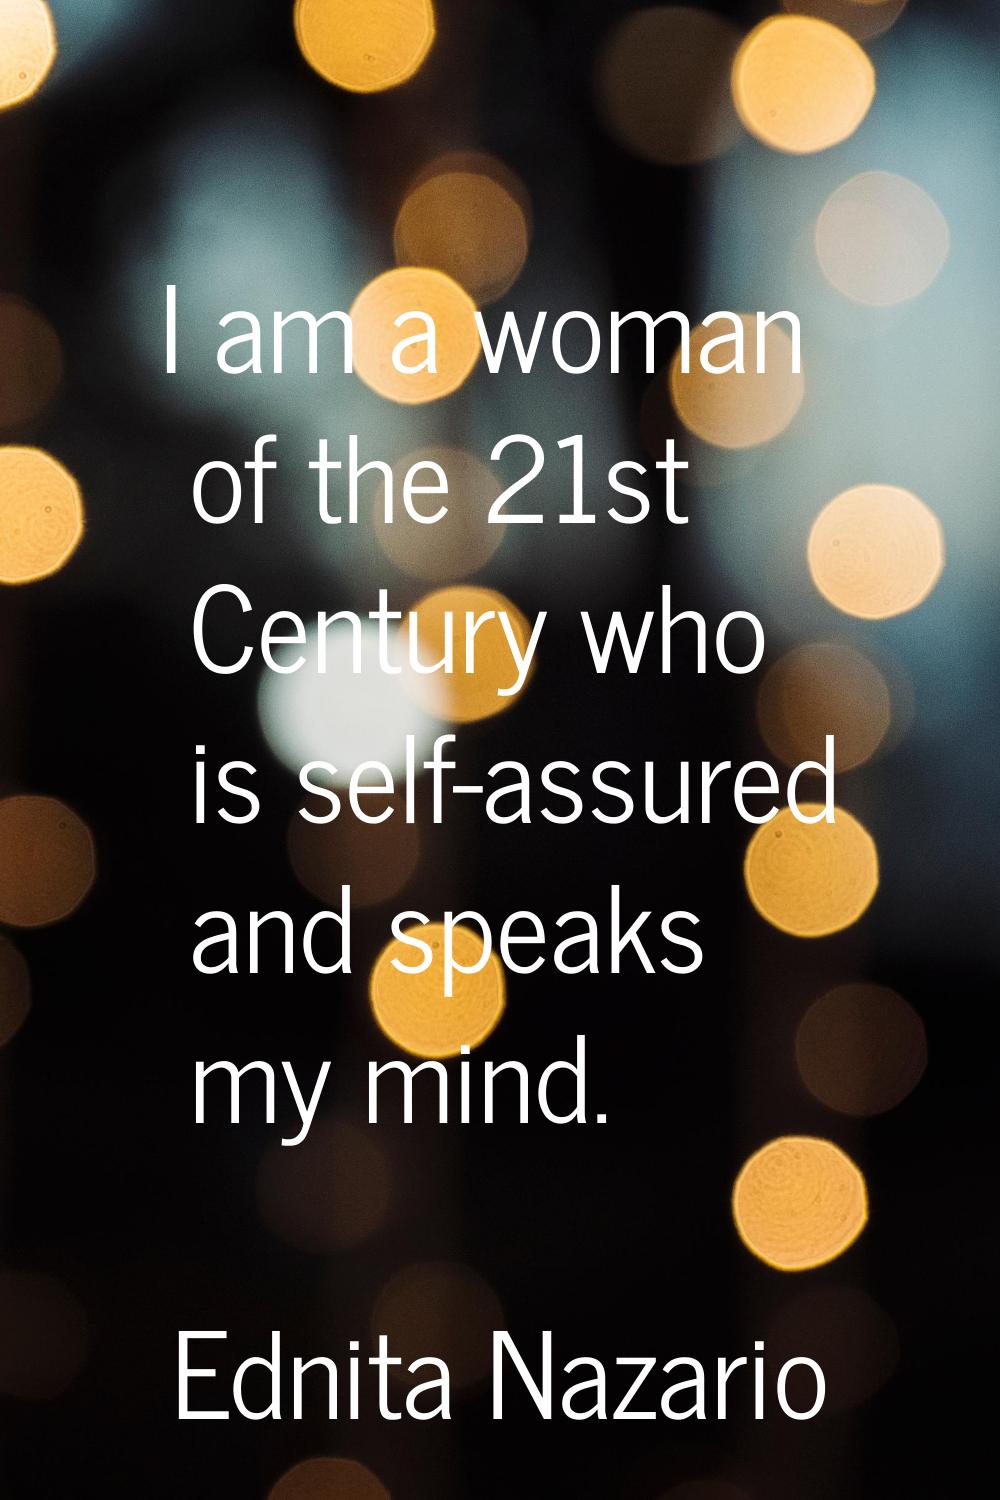 I am a woman of the 21st Century who is self-assured and speaks my mind.